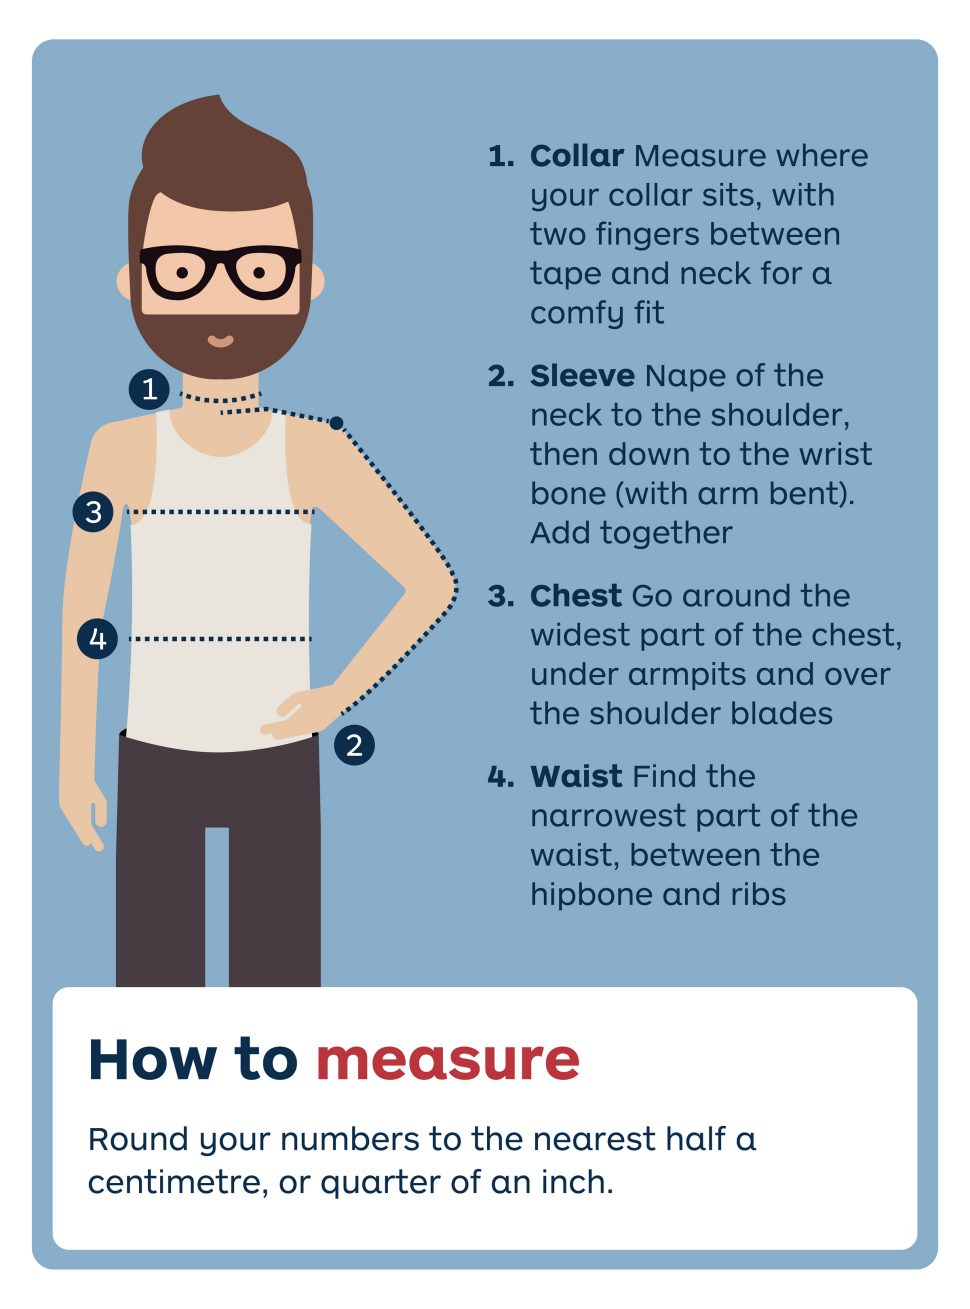 How to measure.
Round your numbers to the nearest half a centimetre, or quarter of an inch.
1. Collar Measure where your collar sits, with two fingers between tape and neck for a comfy fit.
2. Sleeve Nape of the neck to the shoulder, then down to the wrist bone (with arm bent). Add together.
3. Chest Go around the widest part of the chest, under armpits and over the shoulder blades.
4. Waist Find the narrowest part of the waist, between the hipbone and ribs.